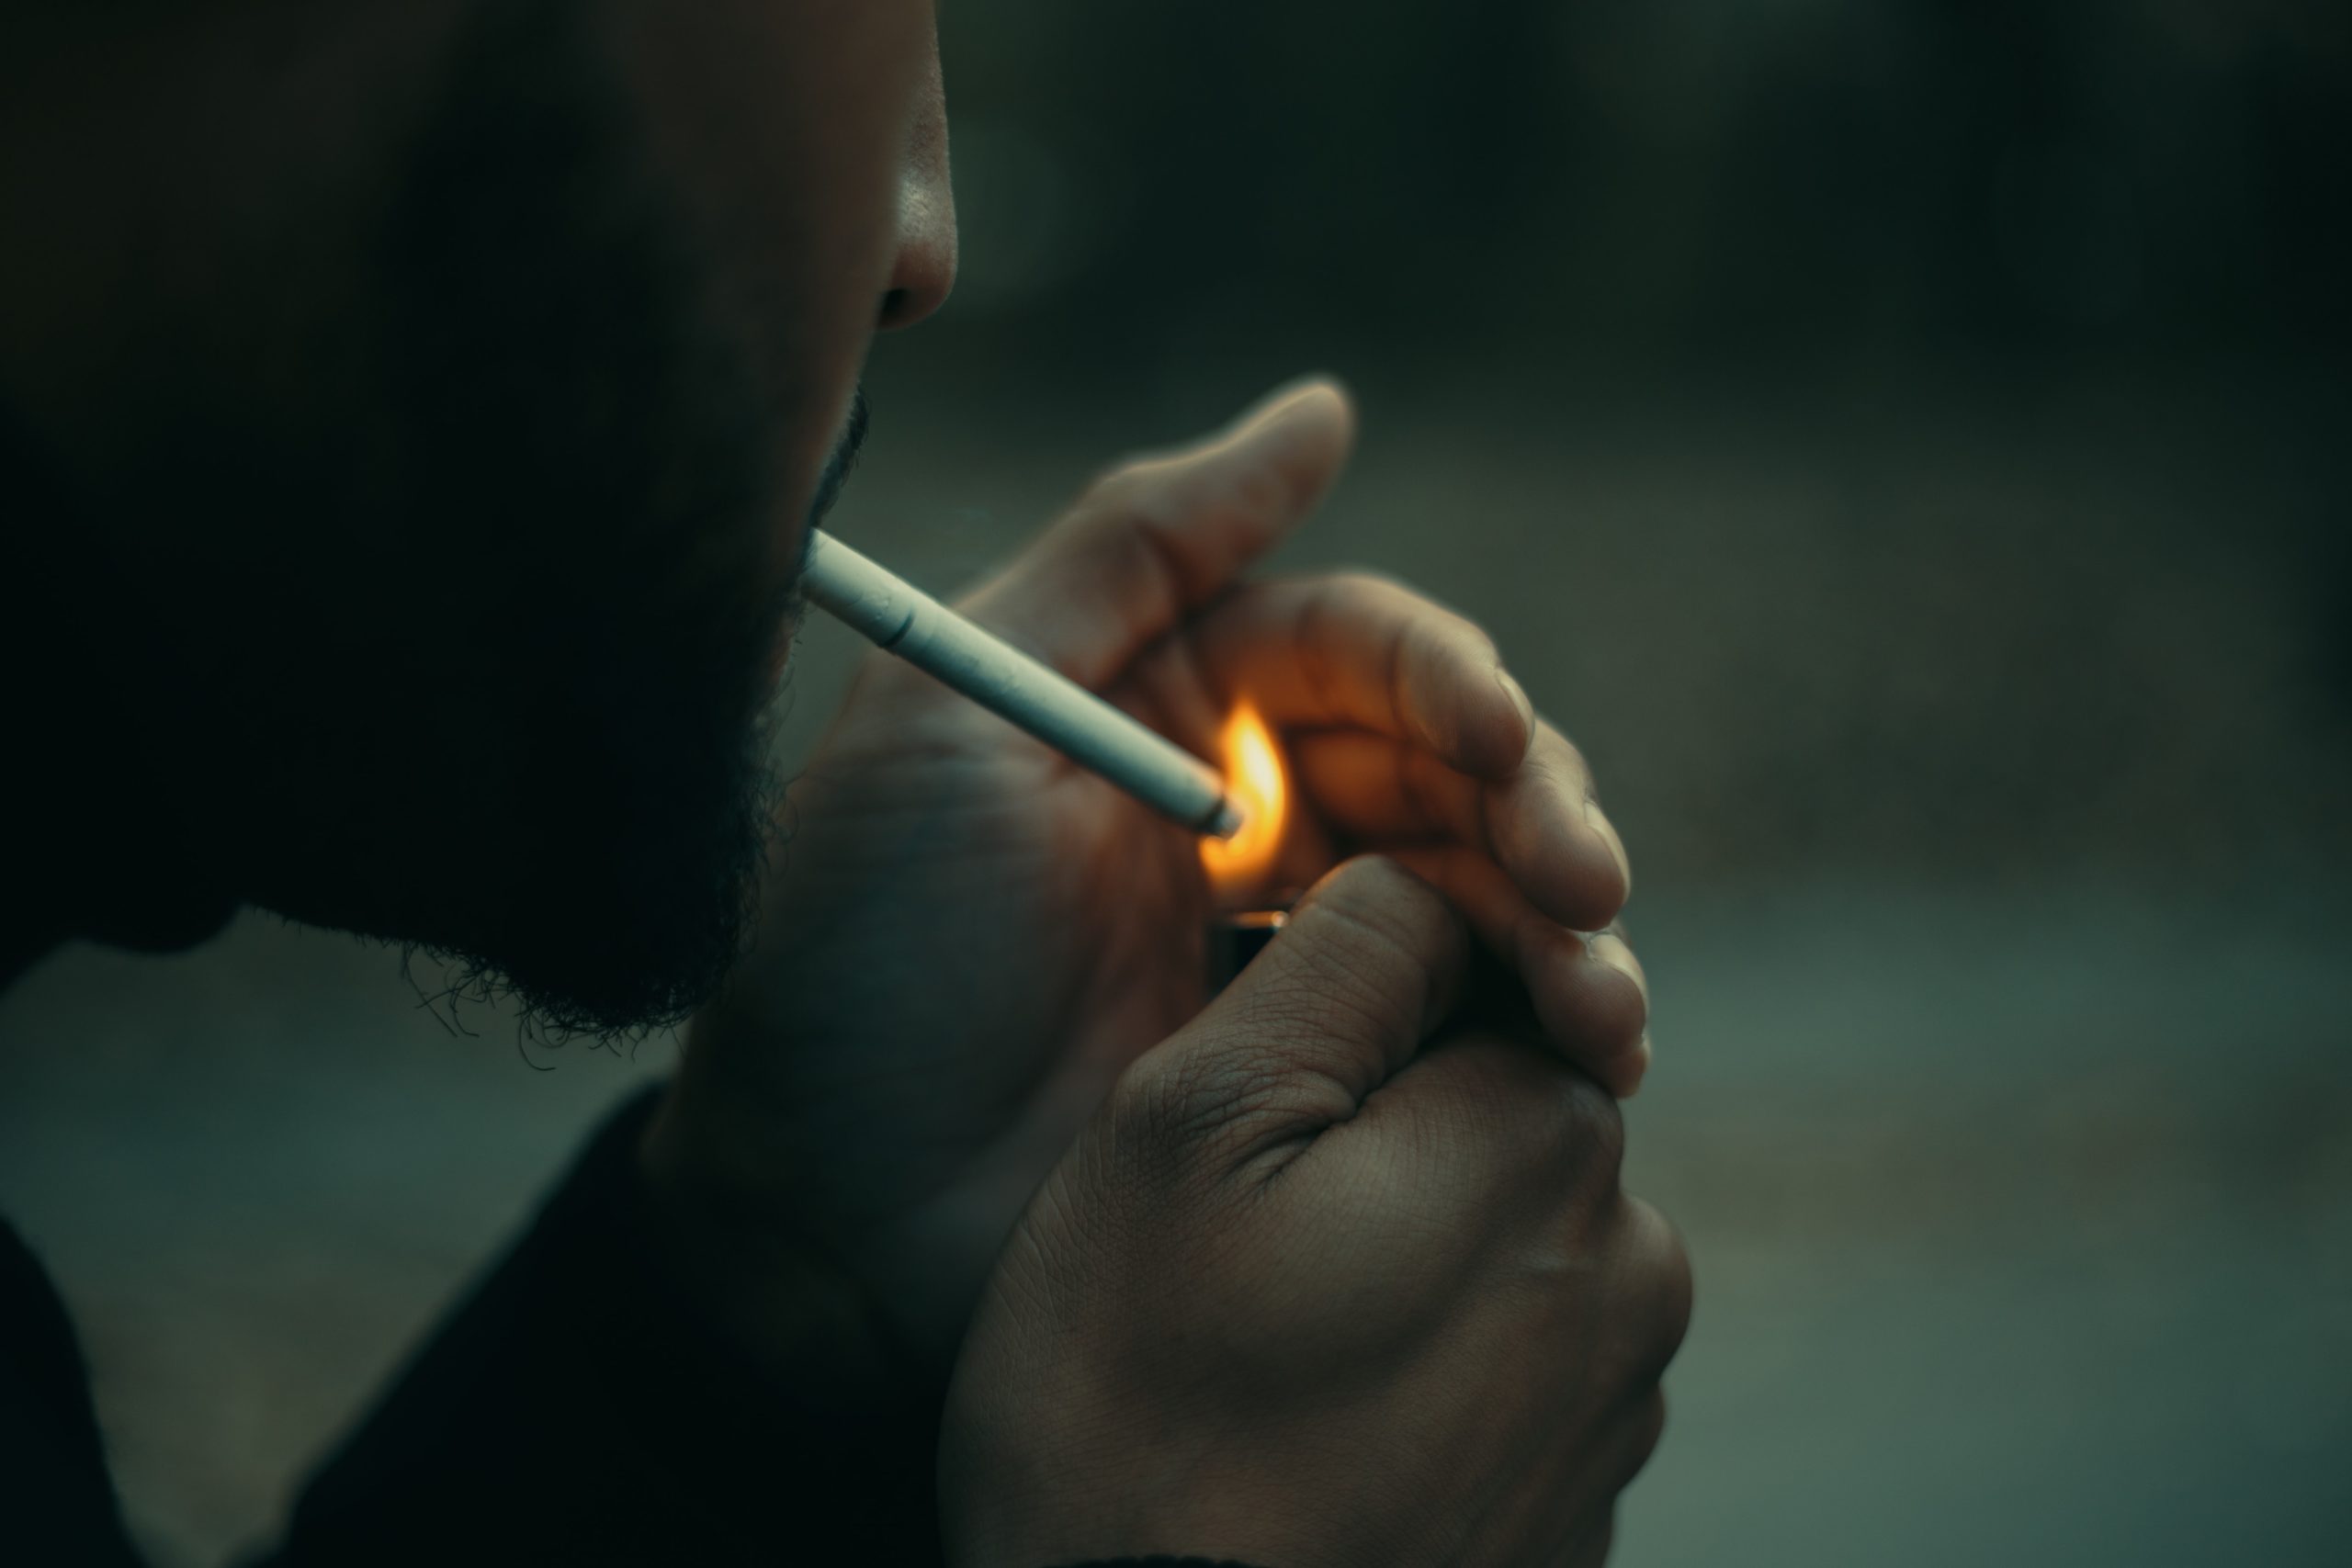 A man lighting a cigarette in his mouth.